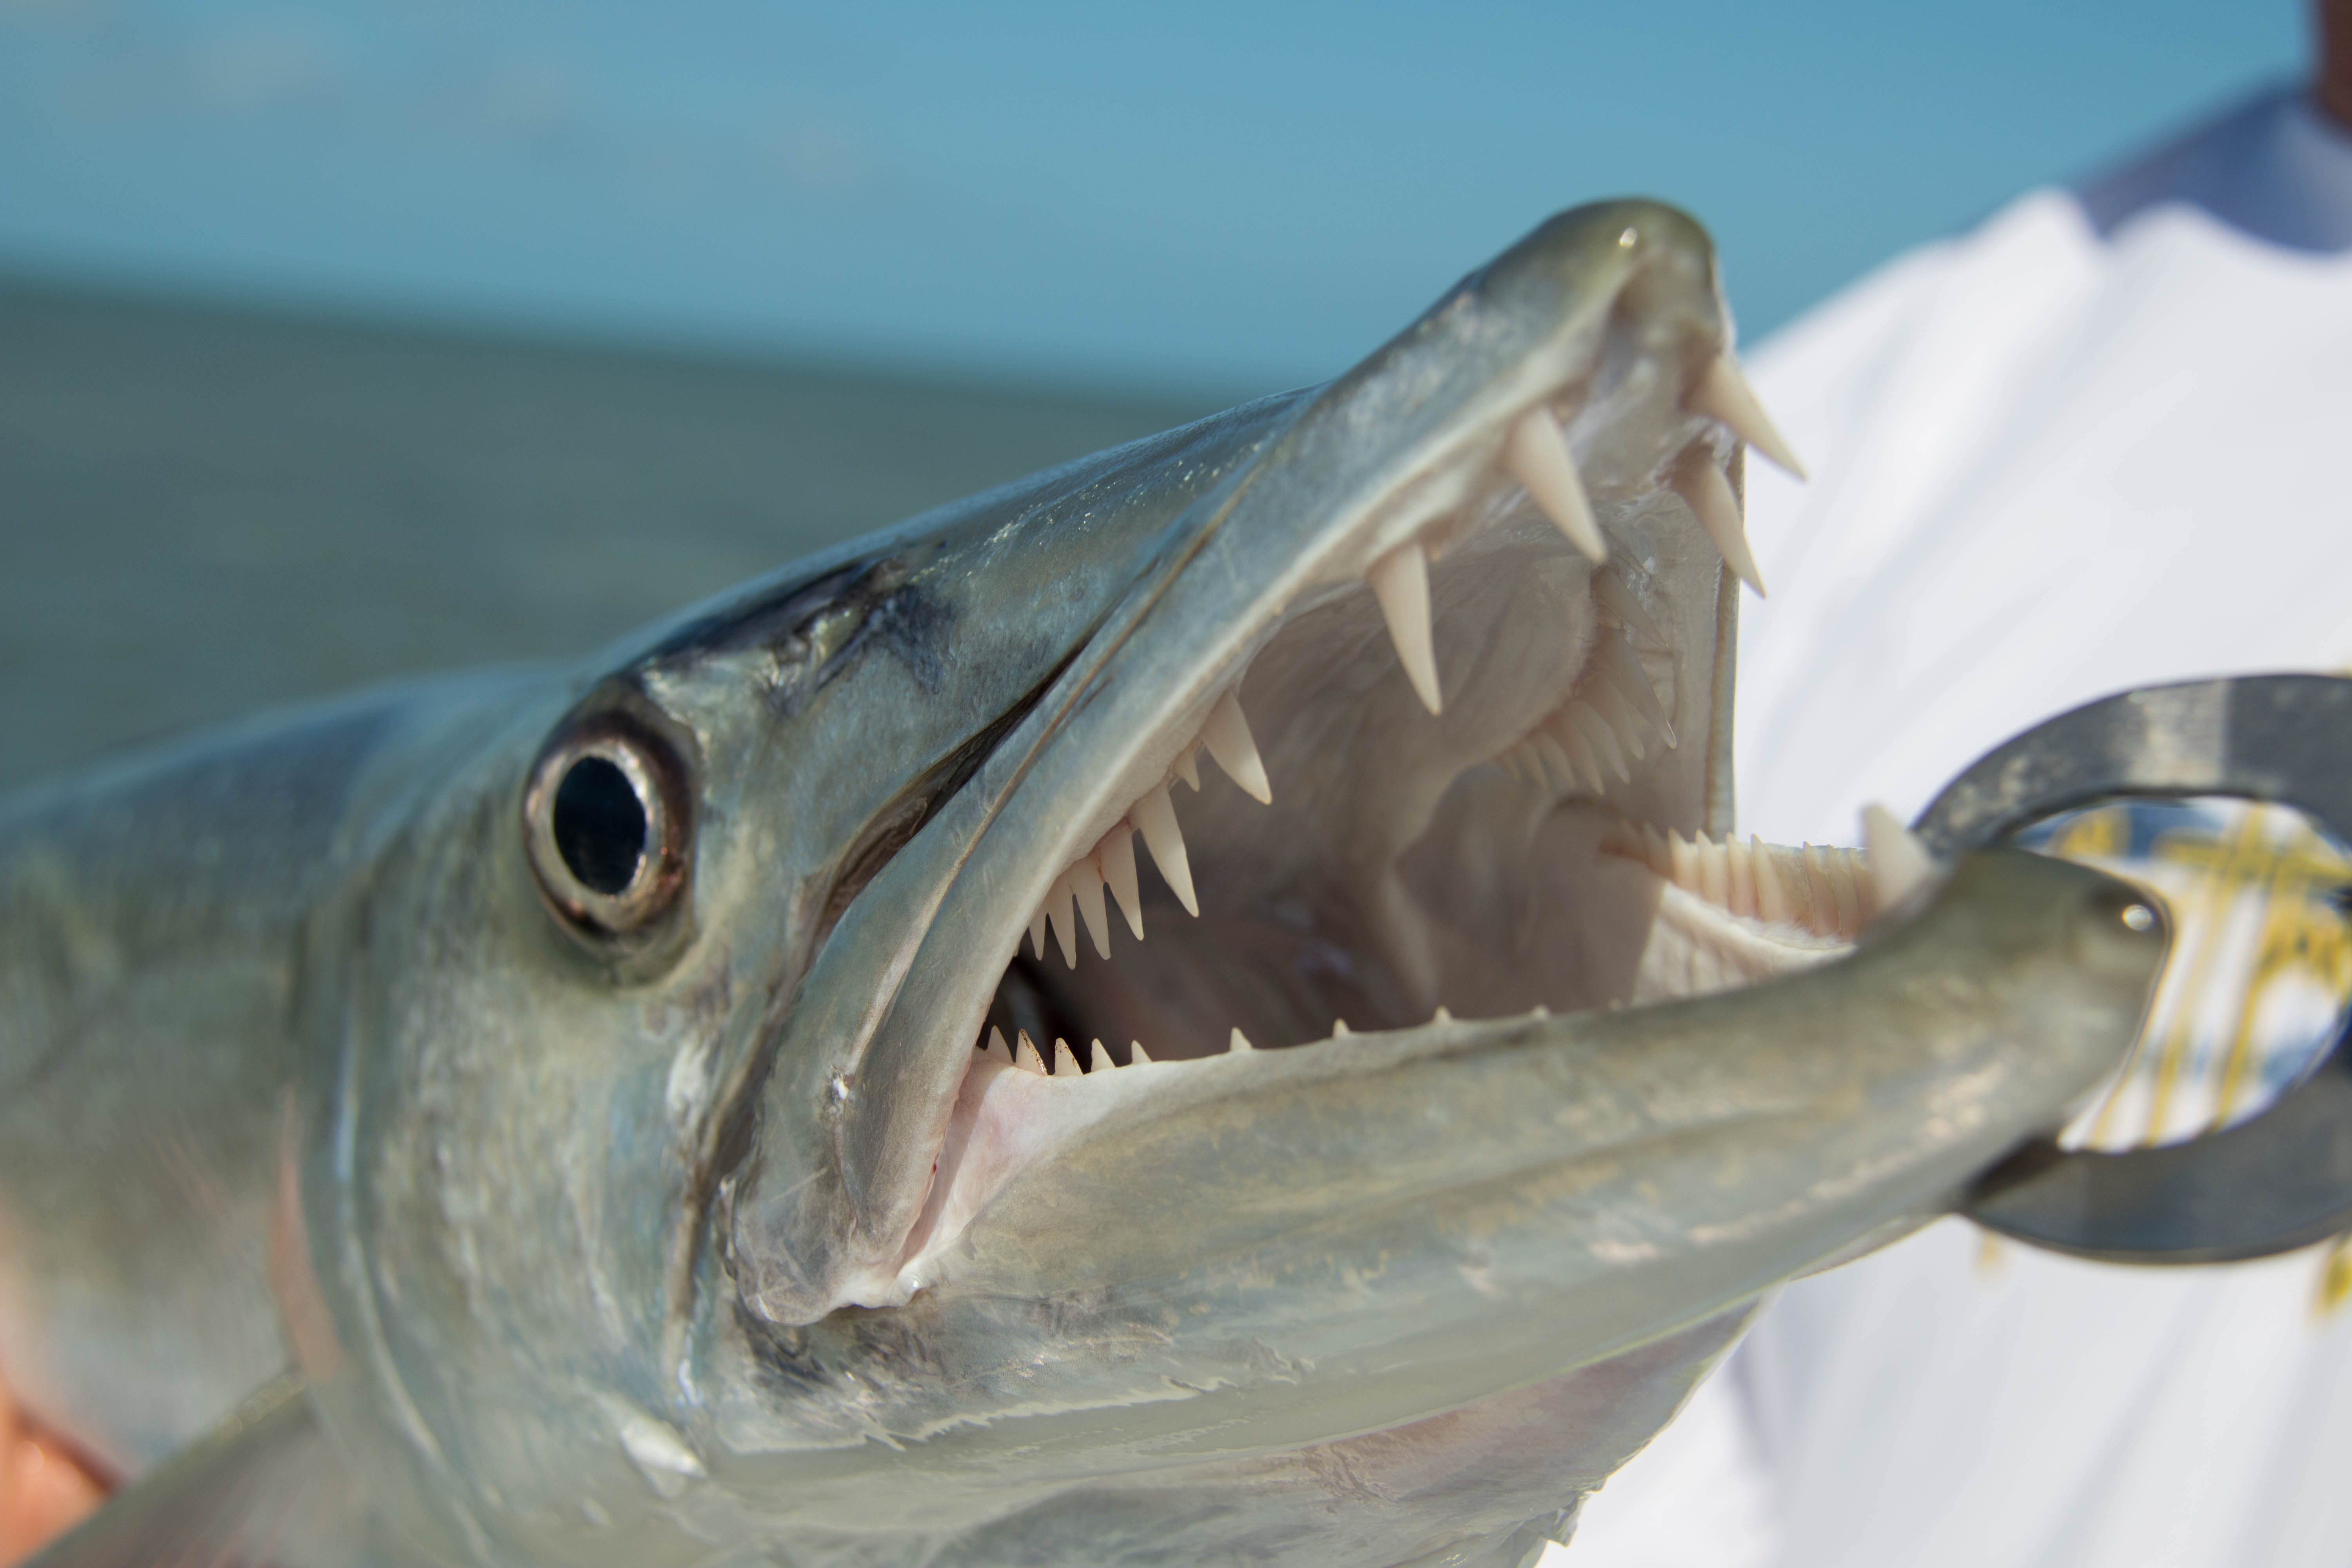 These explosive fish are a lot of fun to catch in the shallow waters in the Florida Keys